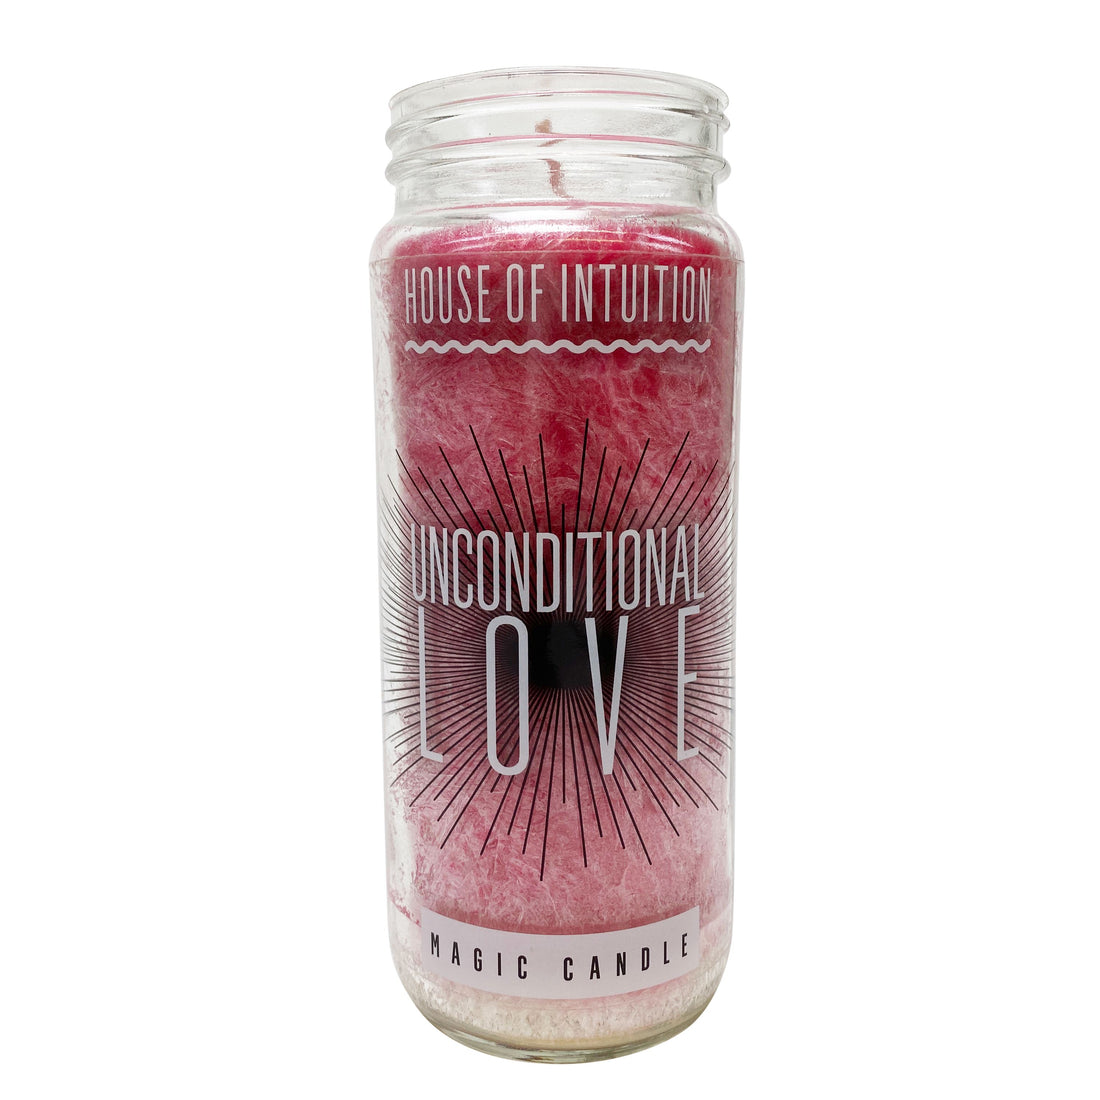 Unconditional Love Magic Candle Magic Candles House of Intuition 1 Candle 